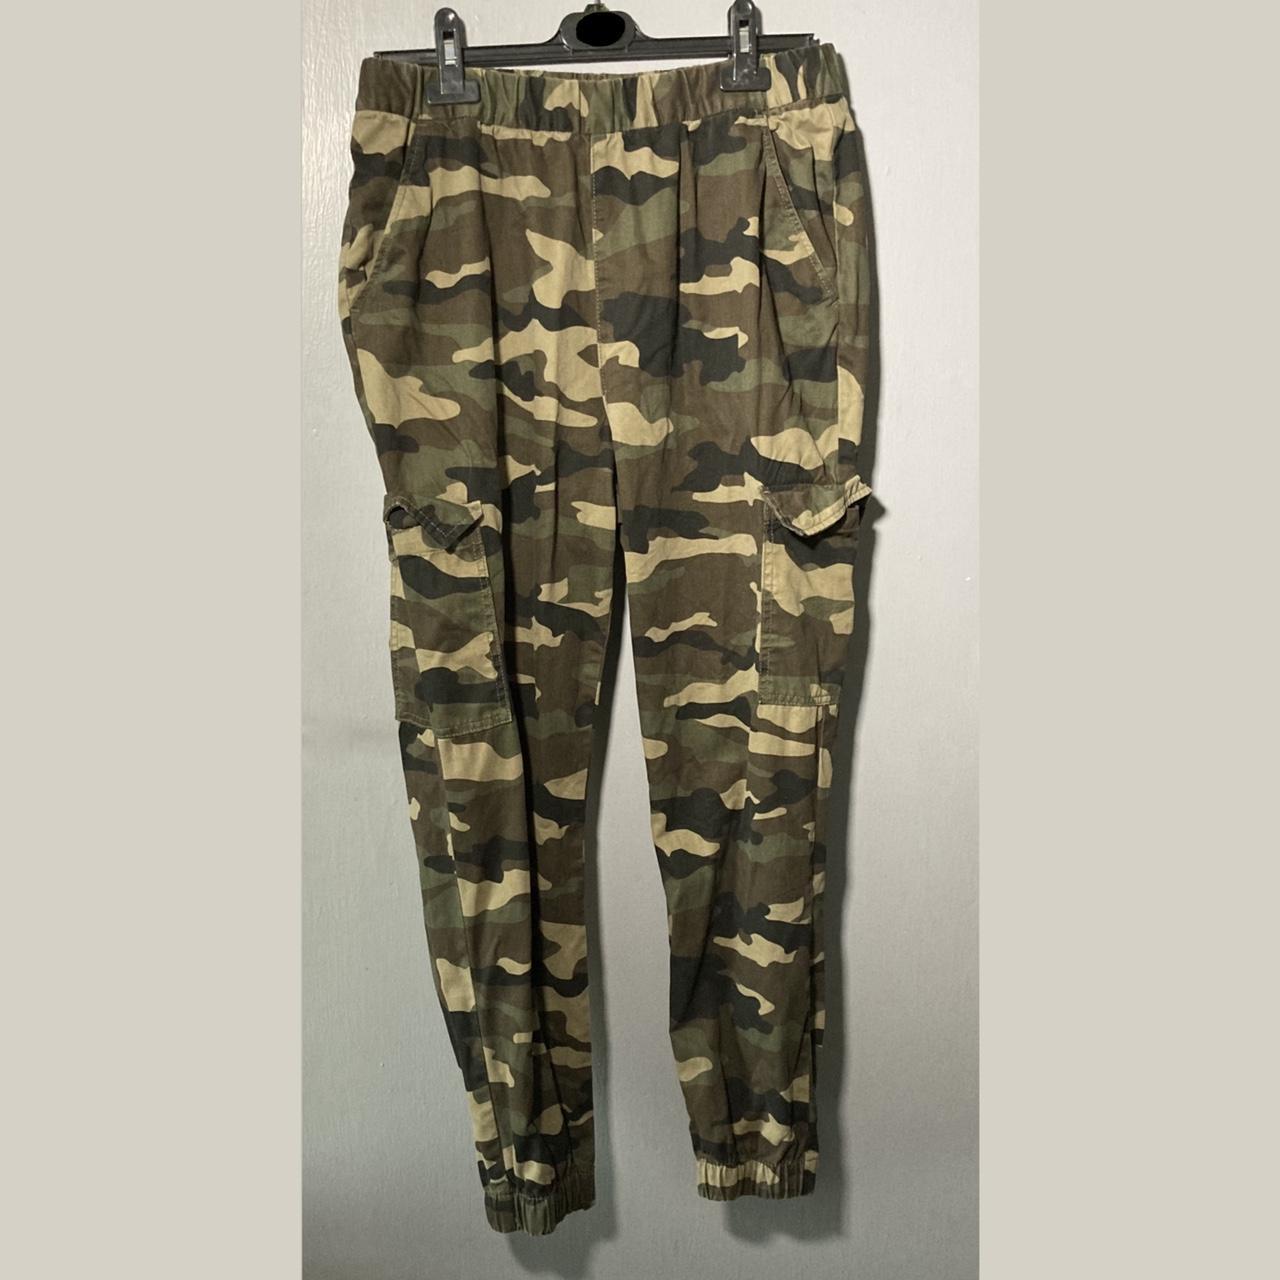 H&M Divided Camo cargo trousers with elasticated... - Depop